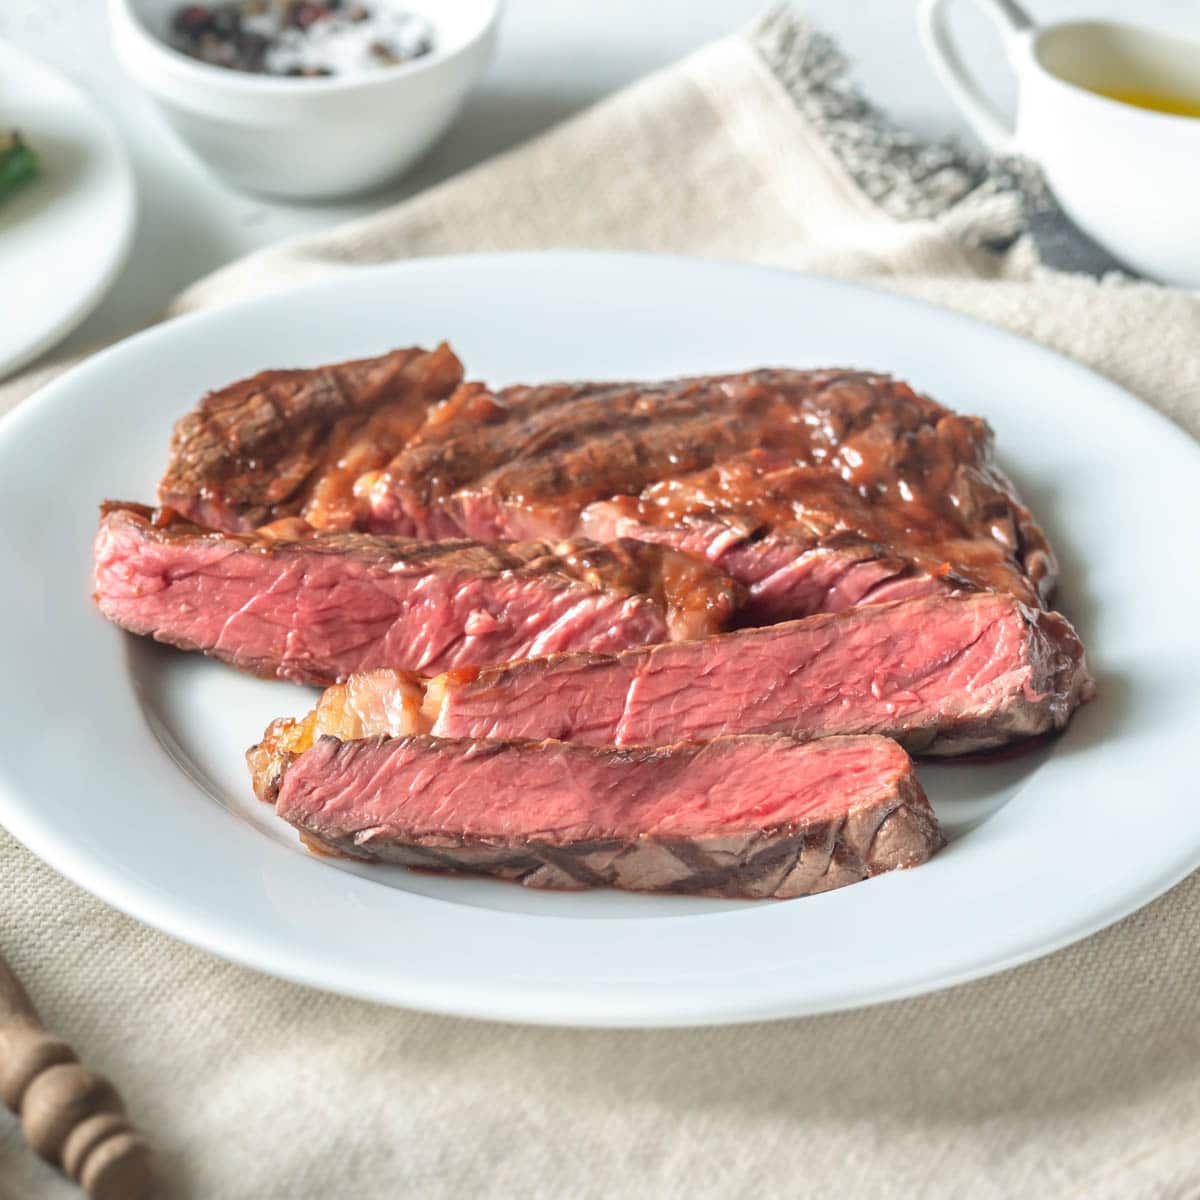 Grilled steak cut into strips on a white plate with a linen place mat underneath.